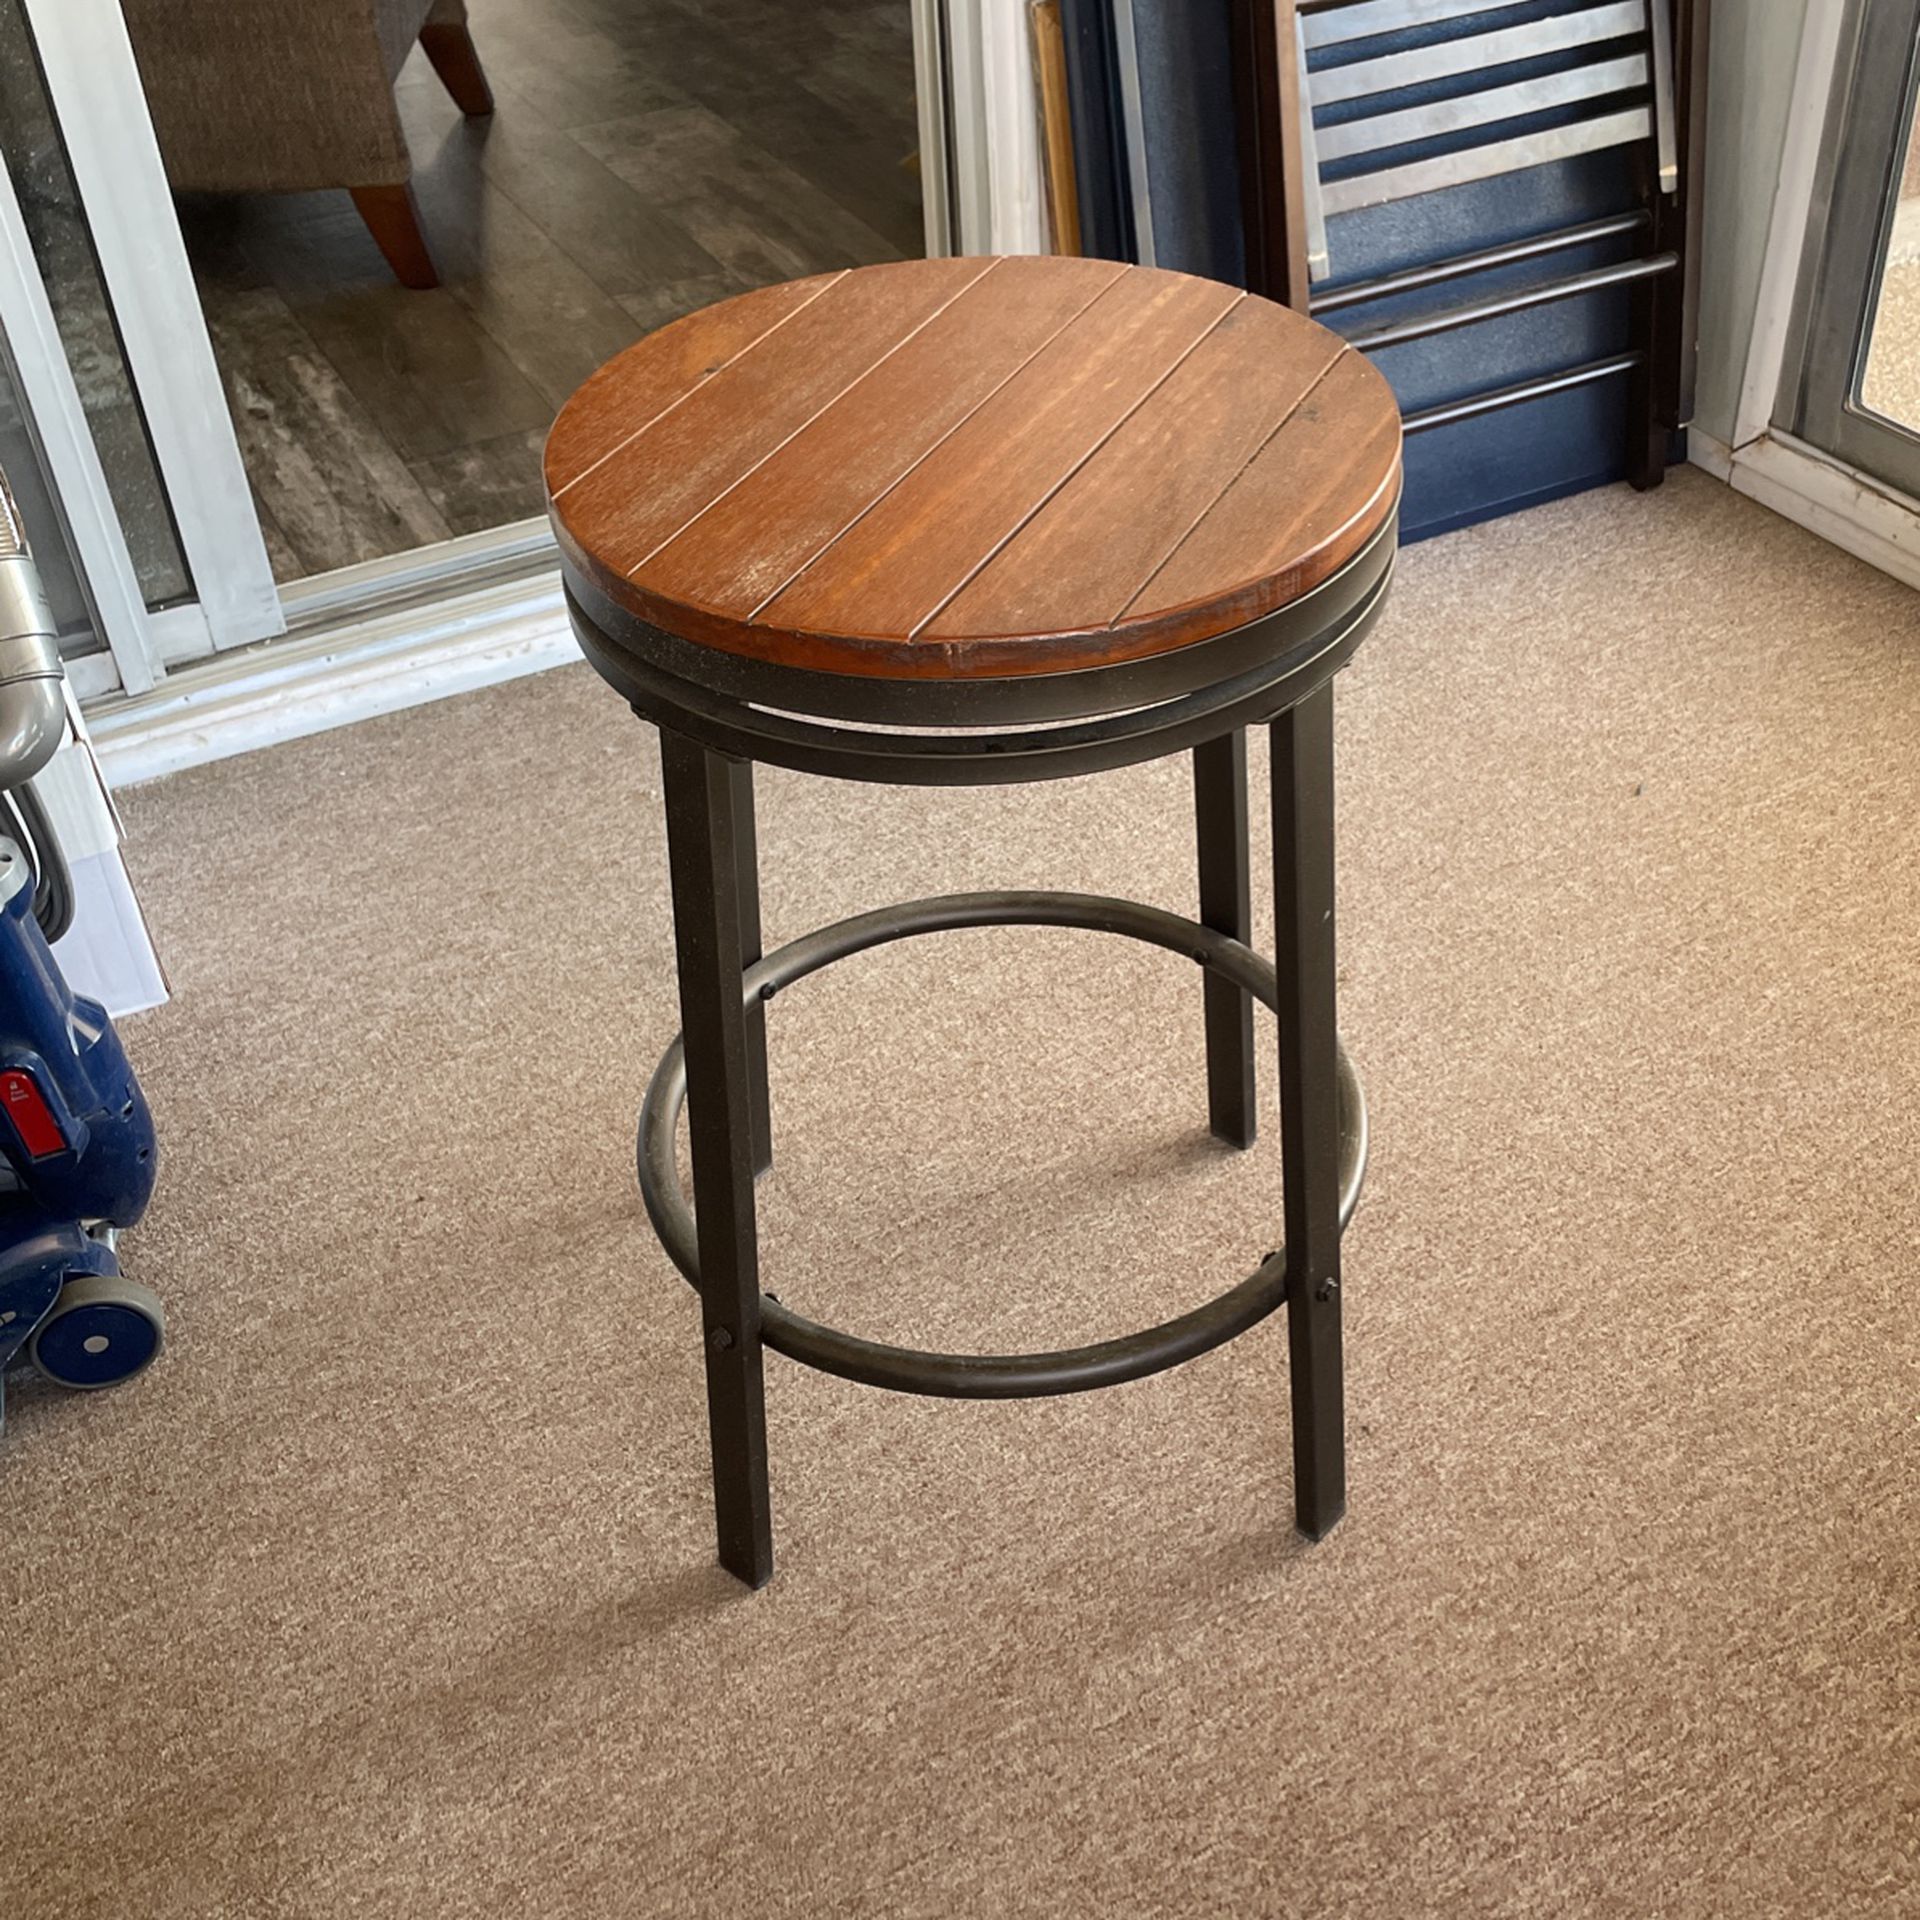 2 Counter Height Bar Stools For Sale